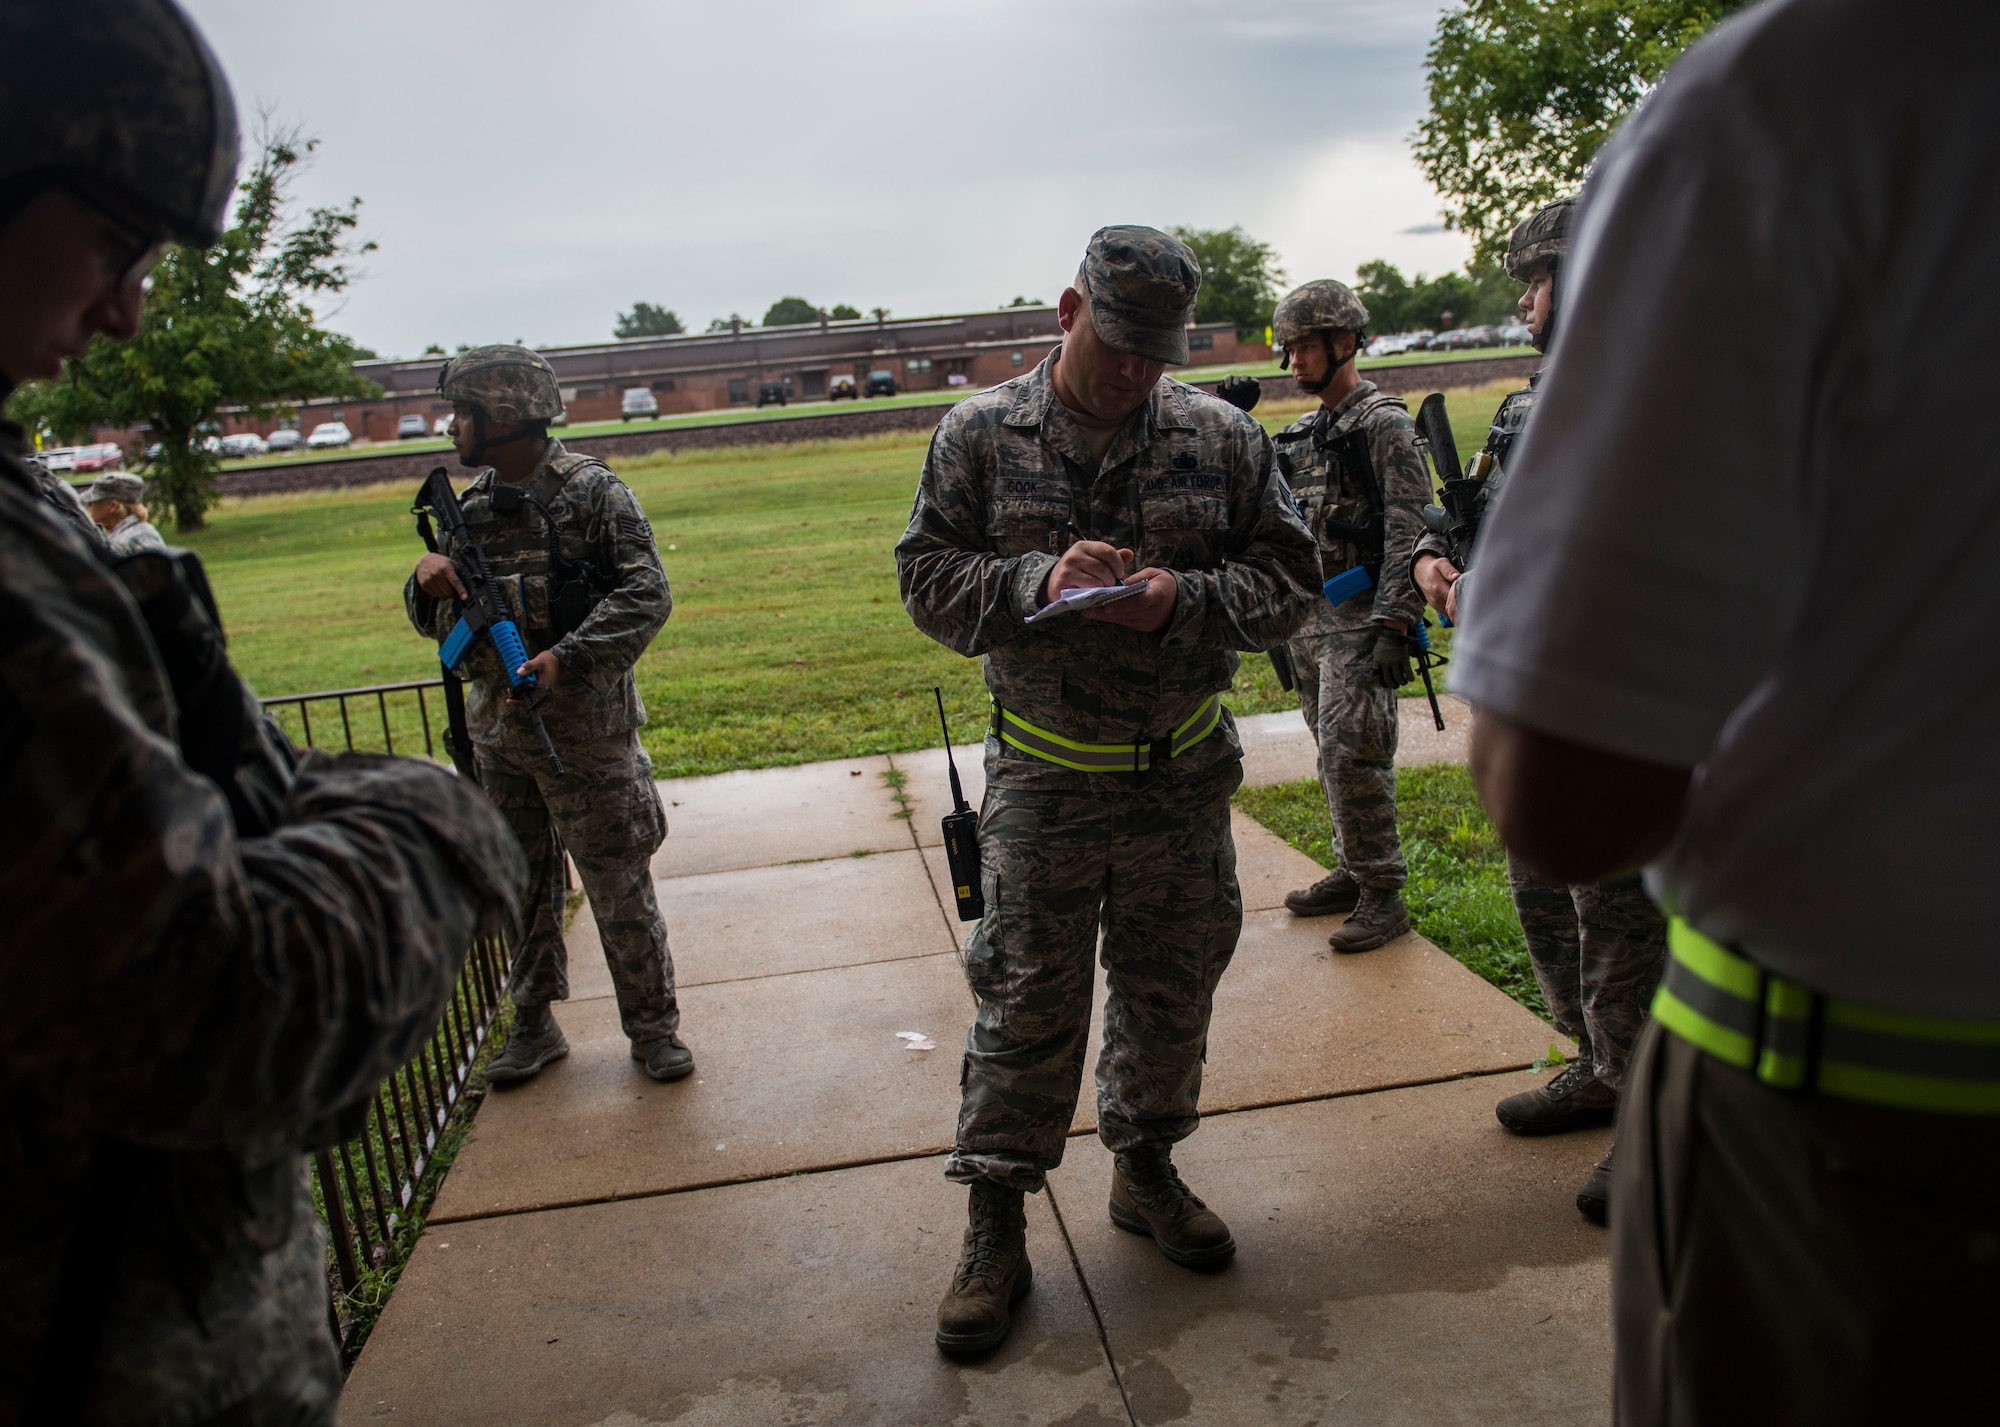 375th Security Forces Squadron members are briefed by the inspector during an active shooter exercise Scott Air Force Base, Ill., Sept. 9, 2016.  With an increase of mass shootings, the Department of Defense has trained personnel and first responders on how to respond in an active shooter situation.